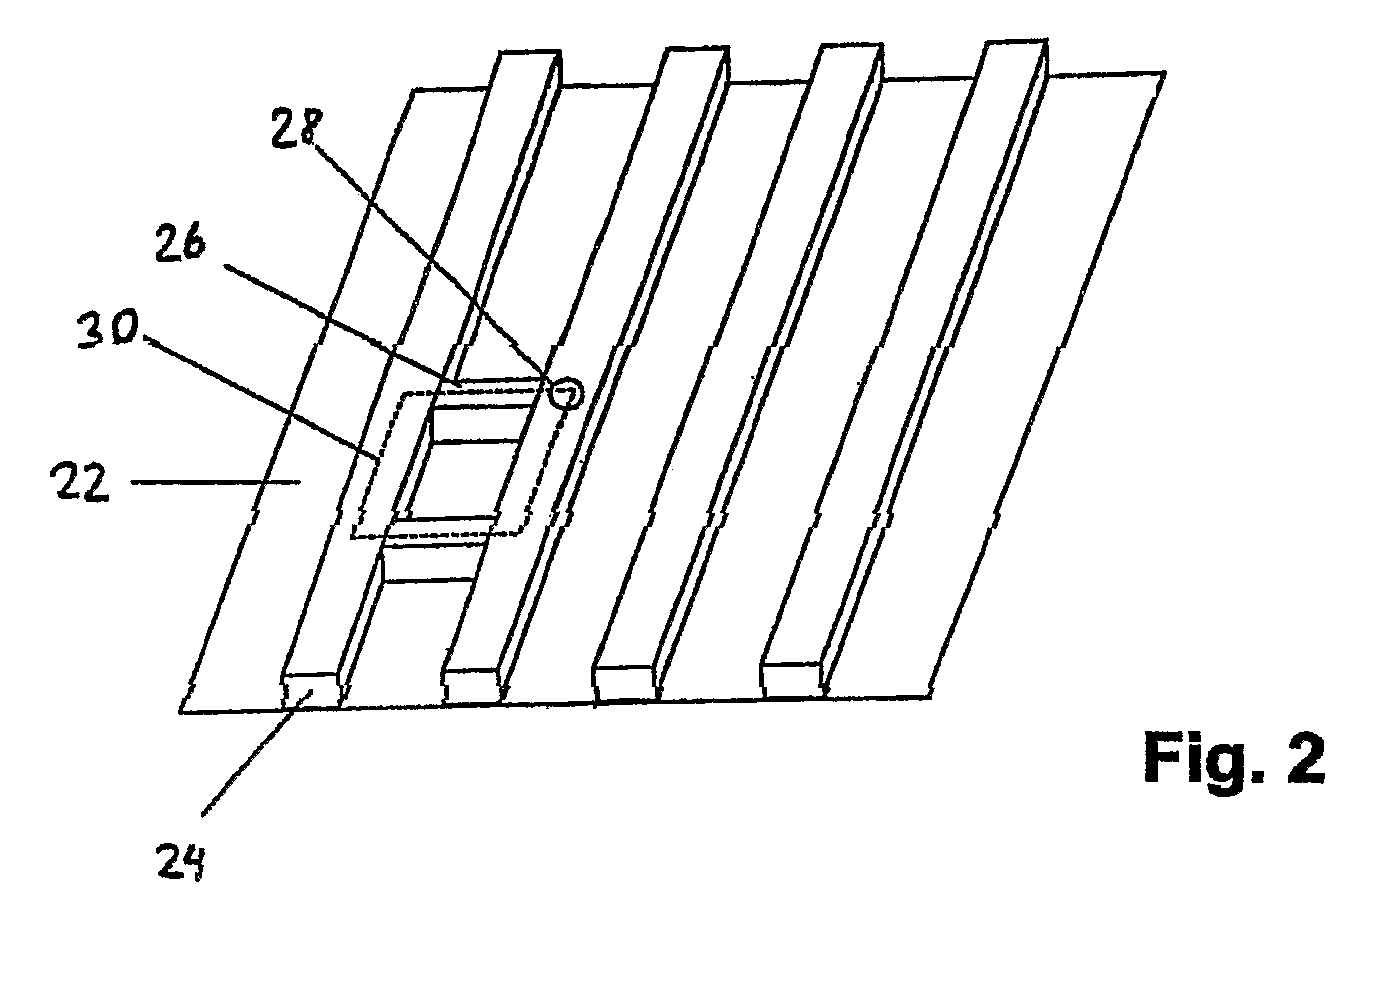 Method for producing a continuous, three-dimensional, closed semi-finished product made of fiber composite